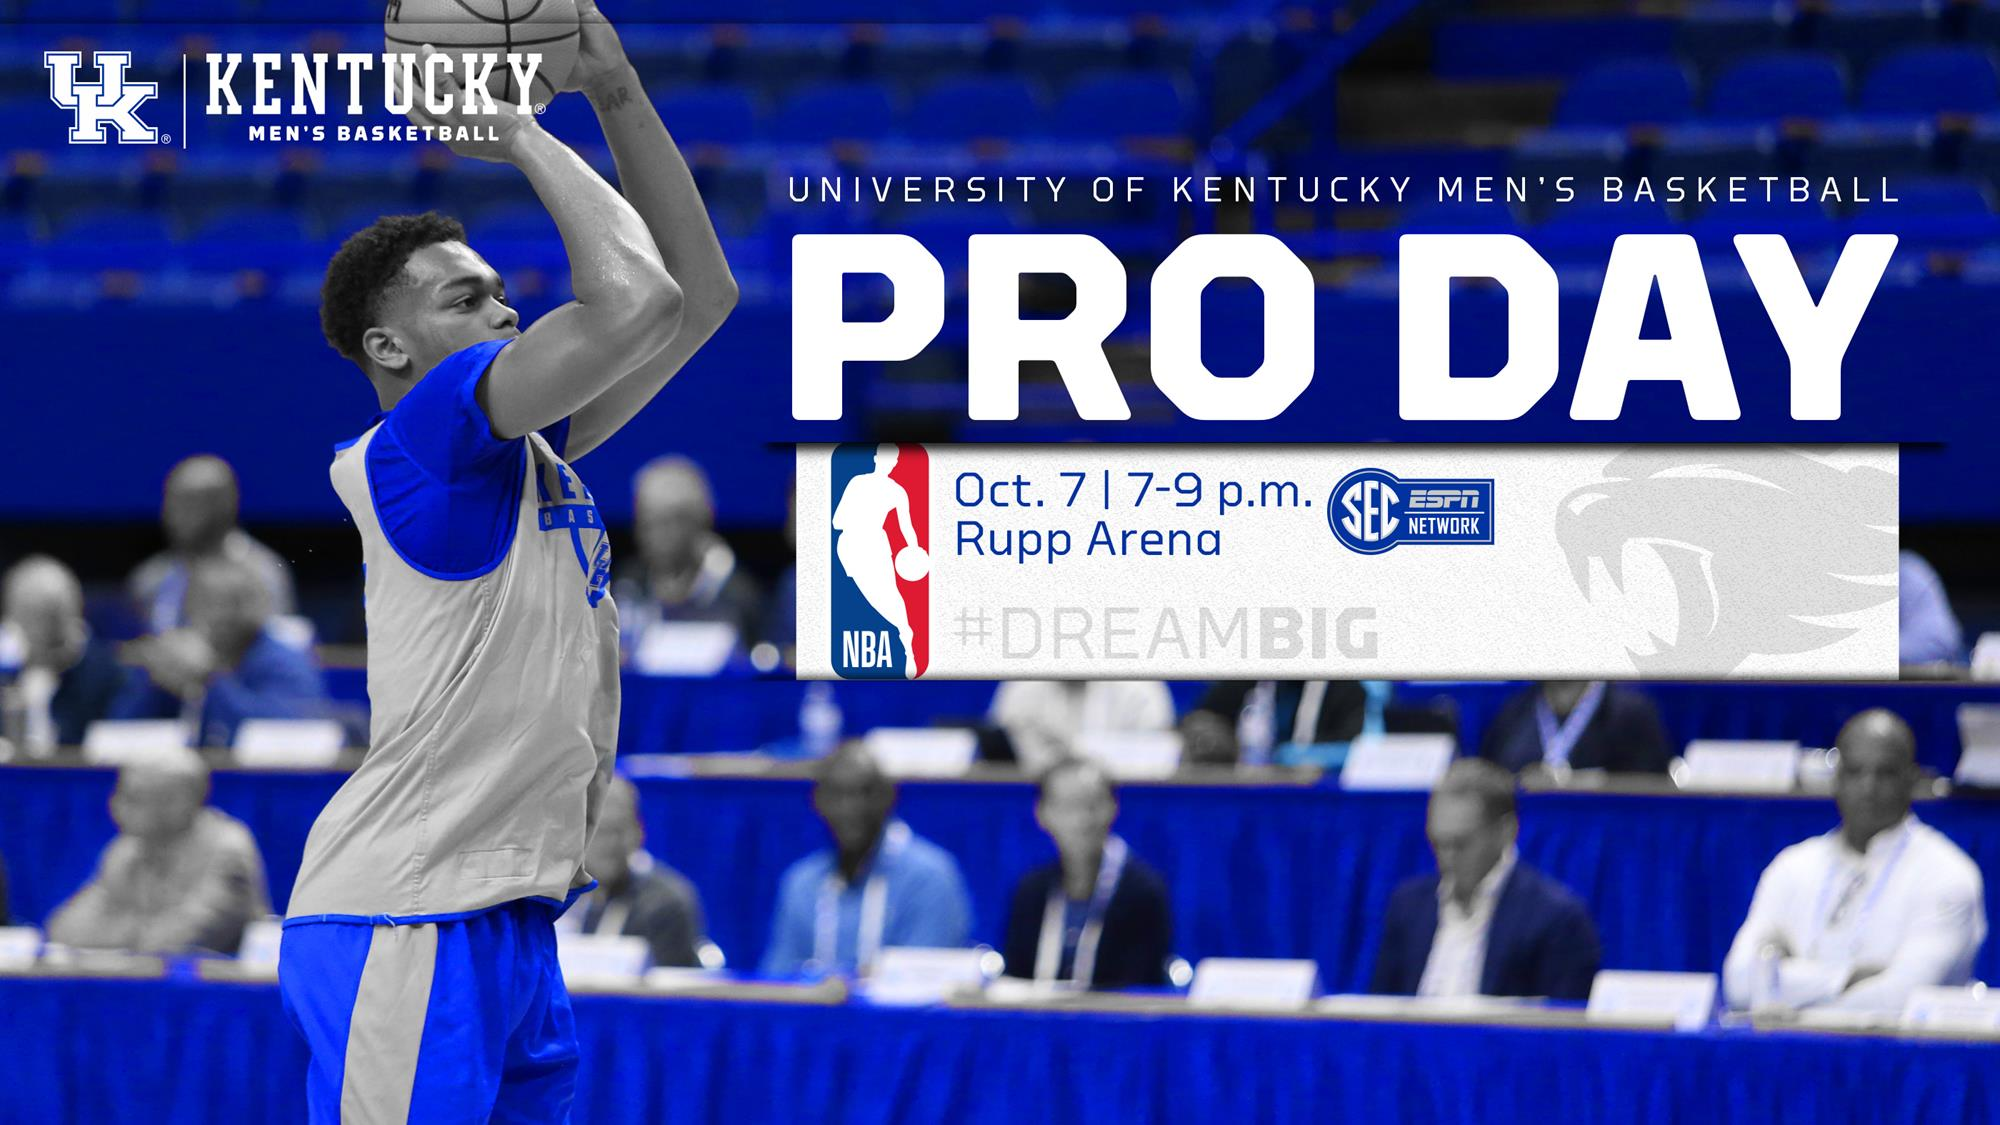 UK Men’s Basketball Pro Day Set for Oct. 7 in Rupp Arena